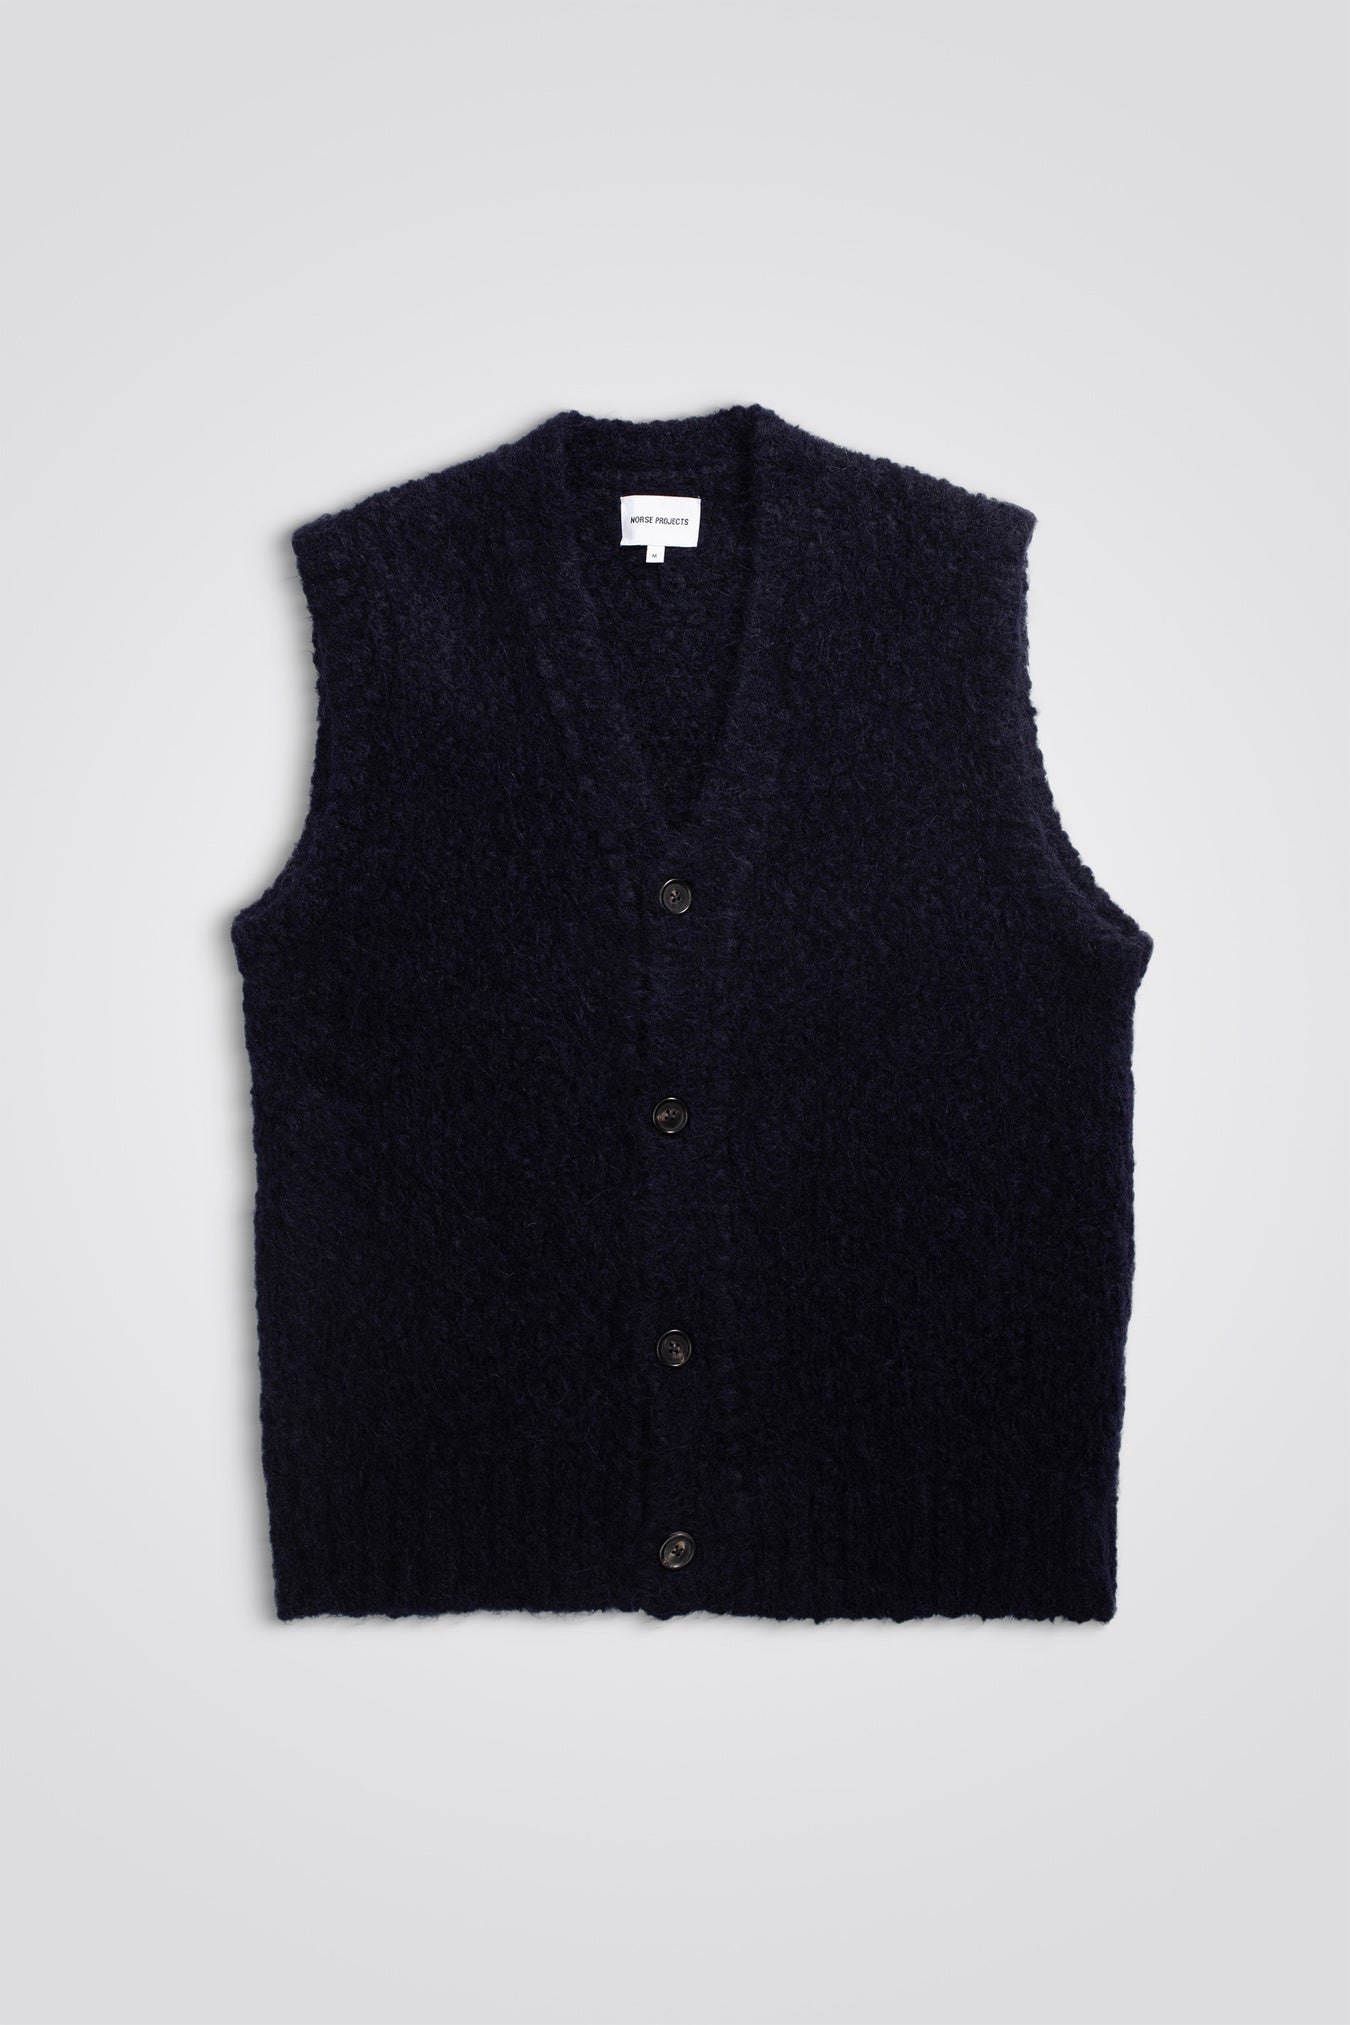 August Flame Alpaca Cardigan Vest - Norse Projects - Danali - N45-0590-Navy-S